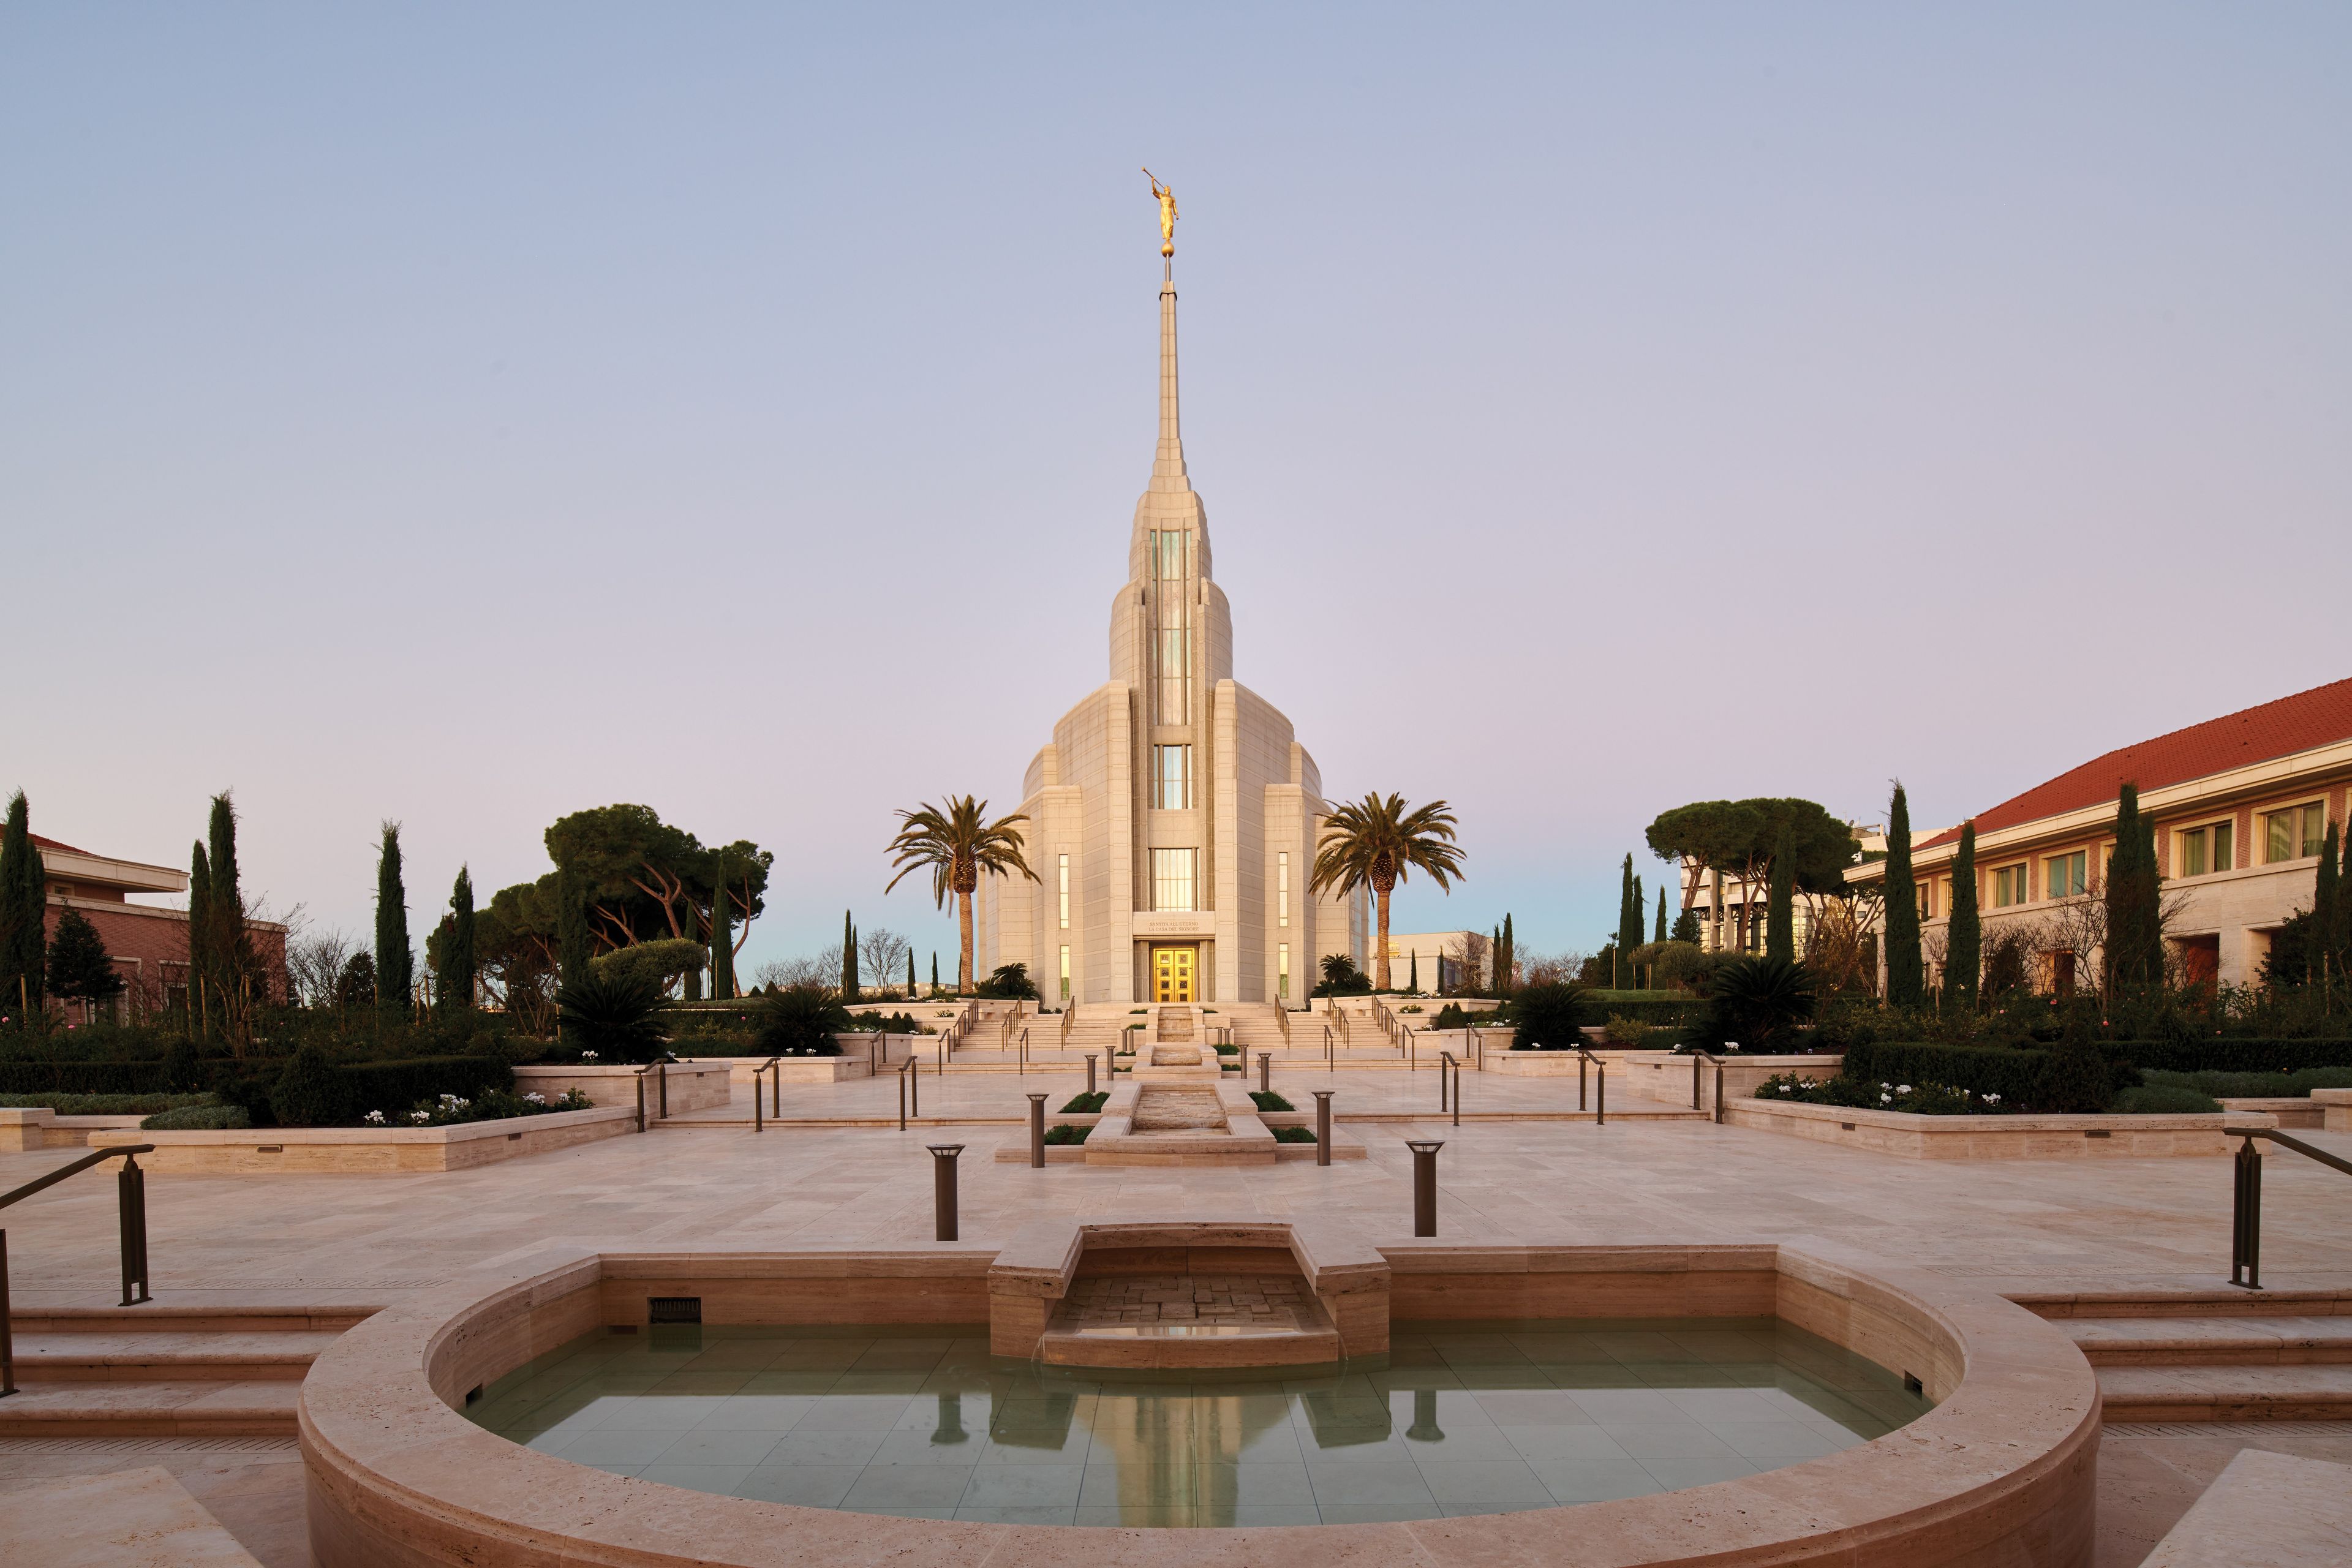 The Rome Italy Temple grounds and fountain in the day.